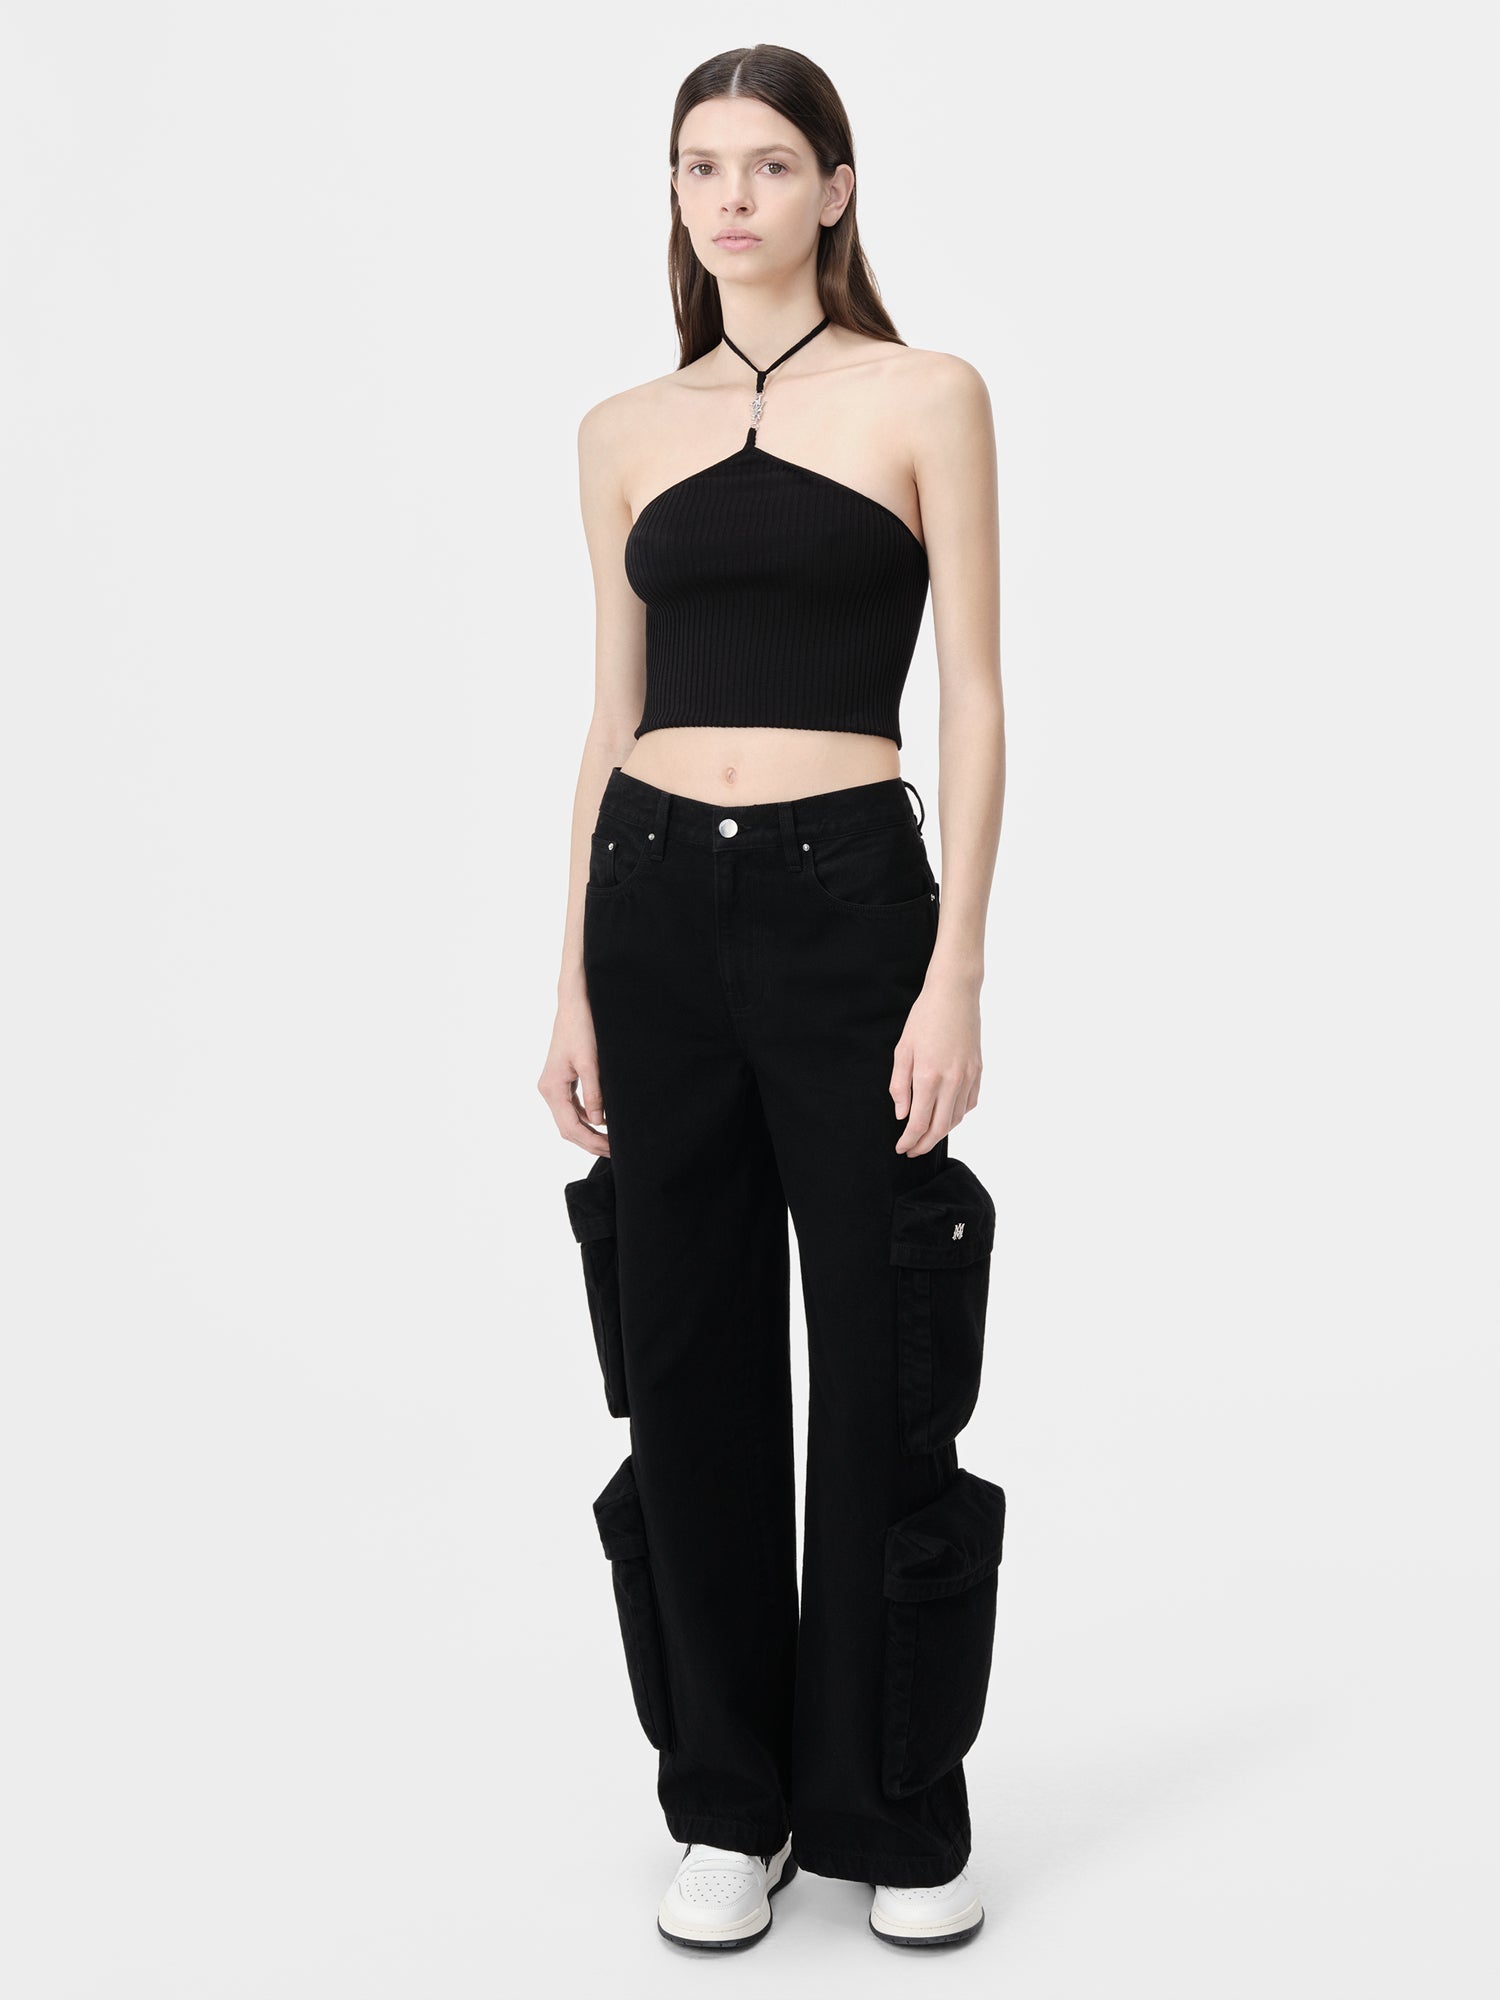 Product WOMEN - WOMEN'S AMIRI STACKED HALTER TOP - Black featured image